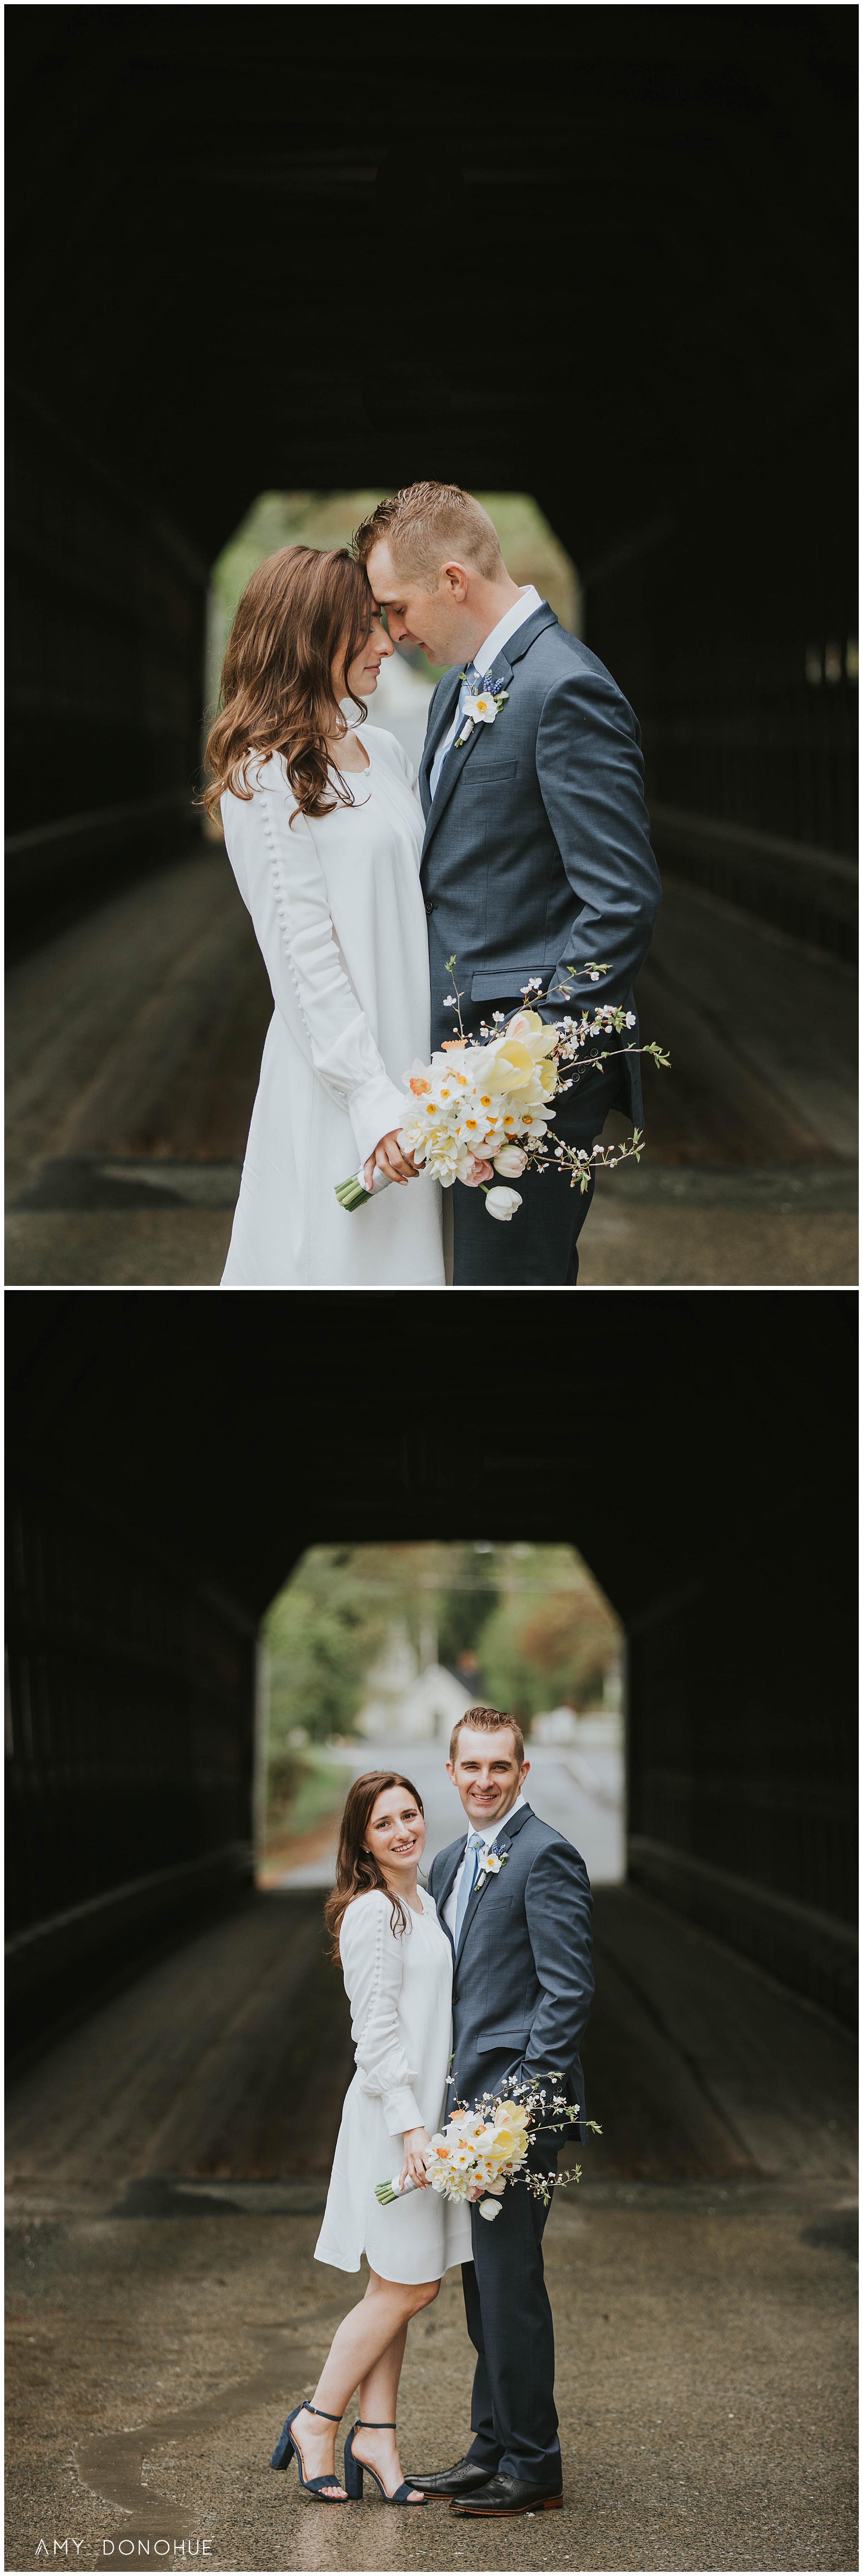 Intimate and romantic elopement portraits at the covered bridge Woodstock Inn and Resort, Woodstock, Vermont